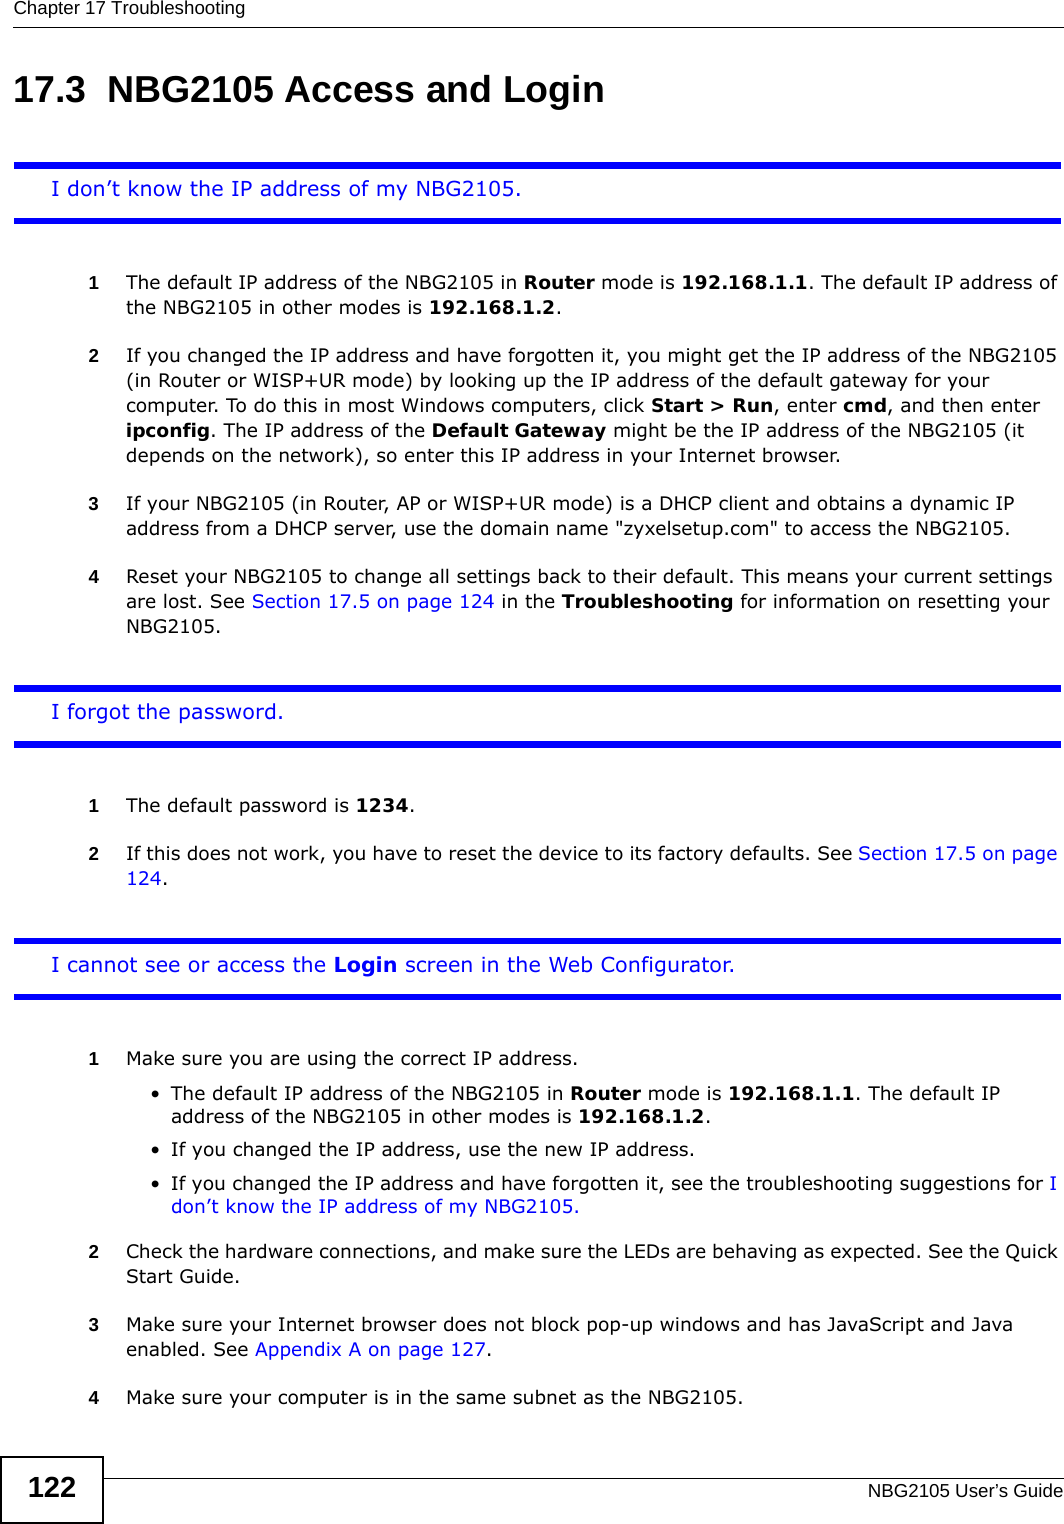 Chapter 17 TroubleshootingNBG2105 User’s Guide12217.3  NBG2105 Access and LoginI don’t know the IP address of my NBG2105.1The default IP address of the NBG2105 in Router mode is 192.168.1.1. The default IP address of the NBG2105 in other modes is 192.168.1.2.2If you changed the IP address and have forgotten it, you might get the IP address of the NBG2105 (in Router or WISP+UR mode) by looking up the IP address of the default gateway for your computer. To do this in most Windows computers, click Start &gt; Run, enter cmd, and then enter ipconfig. The IP address of the Default Gateway might be the IP address of the NBG2105 (it depends on the network), so enter this IP address in your Internet browser. 3If your NBG2105 (in Router, AP or WISP+UR mode) is a DHCP client and obtains a dynamic IP address from a DHCP server, use the domain name &quot;zyxelsetup.com&quot; to access the NBG2105.4Reset your NBG2105 to change all settings back to their default. This means your current settings are lost. See Section 17.5 on page 124 in the Troubleshooting for information on resetting your NBG2105. I forgot the password.1The default password is 1234.2If this does not work, you have to reset the device to its factory defaults. See Section 17.5 on page 124.I cannot see or access the Login screen in the Web Configurator.1Make sure you are using the correct IP address.• The default IP address of the NBG2105 in Router mode is 192.168.1.1. The default IP address of the NBG2105 in other modes is 192.168.1.2.• If you changed the IP address, use the new IP address.• If you changed the IP address and have forgotten it, see the troubleshooting suggestions for I don’t know the IP address of my NBG2105.2Check the hardware connections, and make sure the LEDs are behaving as expected. See the Quick Start Guide. 3Make sure your Internet browser does not block pop-up windows and has JavaScript and Java enabled. See Appendix A on page 127.4Make sure your computer is in the same subnet as the NBG2105.